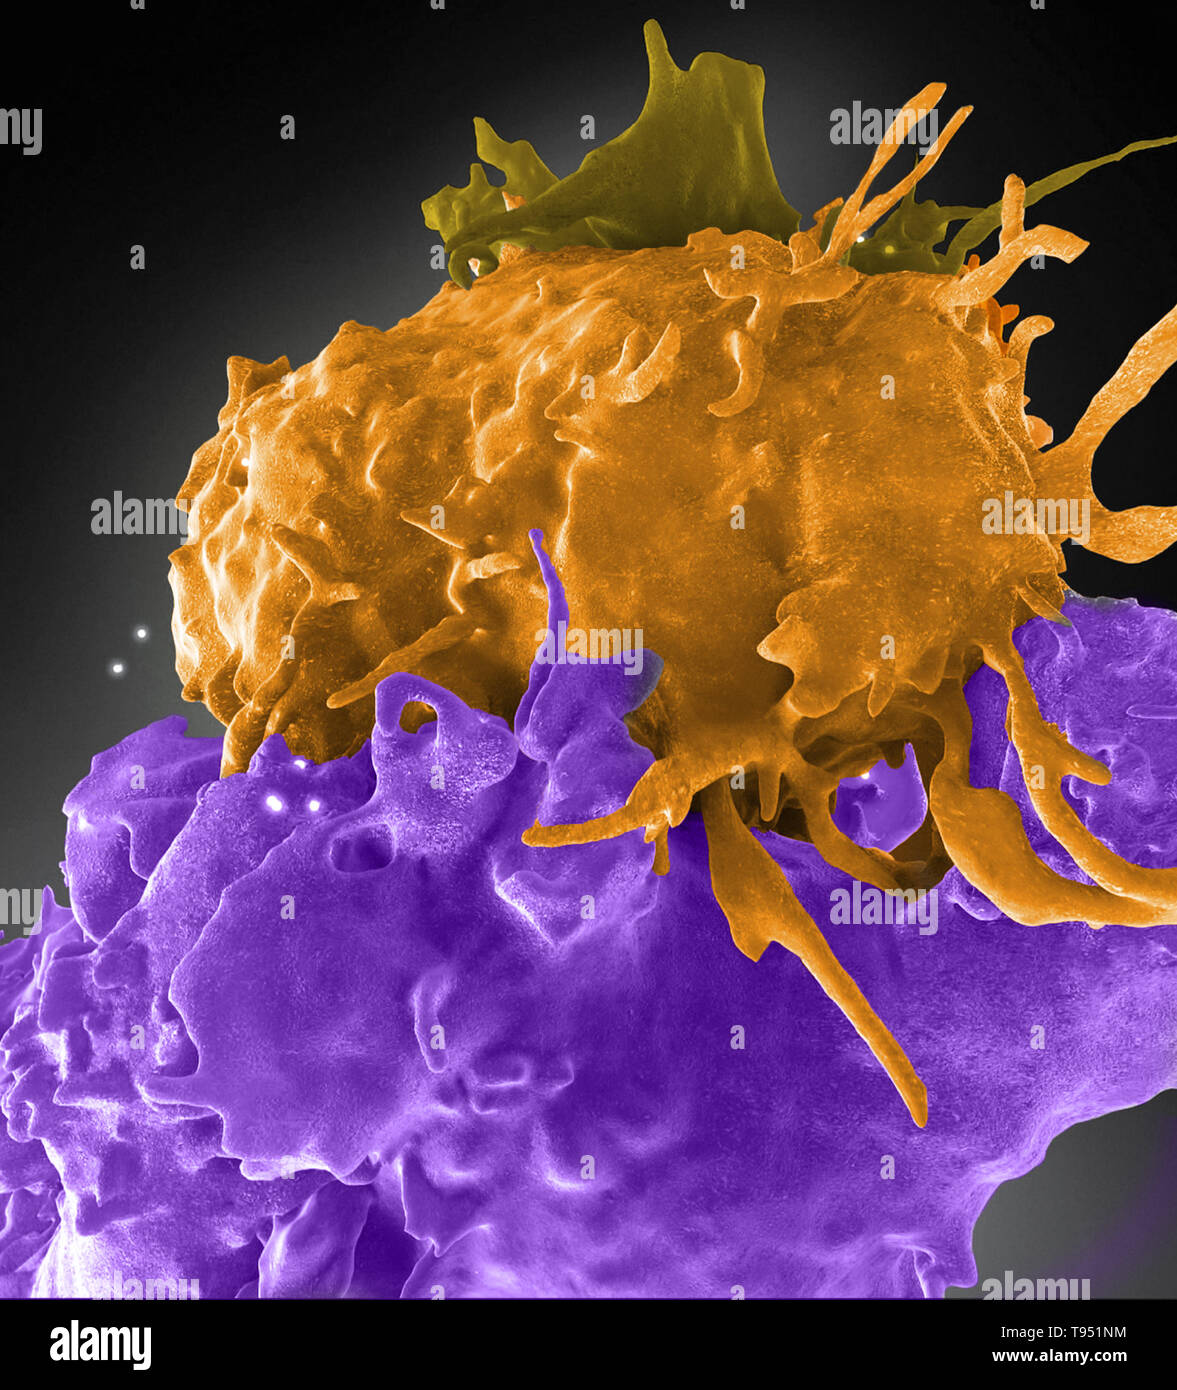 Three-dimensional structure of HIV infected (blue, green) and uninfected (brown, purple) T cells interacting. One cell (brown) has wrapped an extension around its uninfected neighbor (purple) to reach an infected cell (blue). Acquired immunodeficiency syndrome (AIDS) is a chronic, potentially life-threatening condition caused by the human immunodeficiency virus (HIV). By damaging your immune system, HIV interferes with your body's ability to fight the organisms that cause disease. Stock Photo